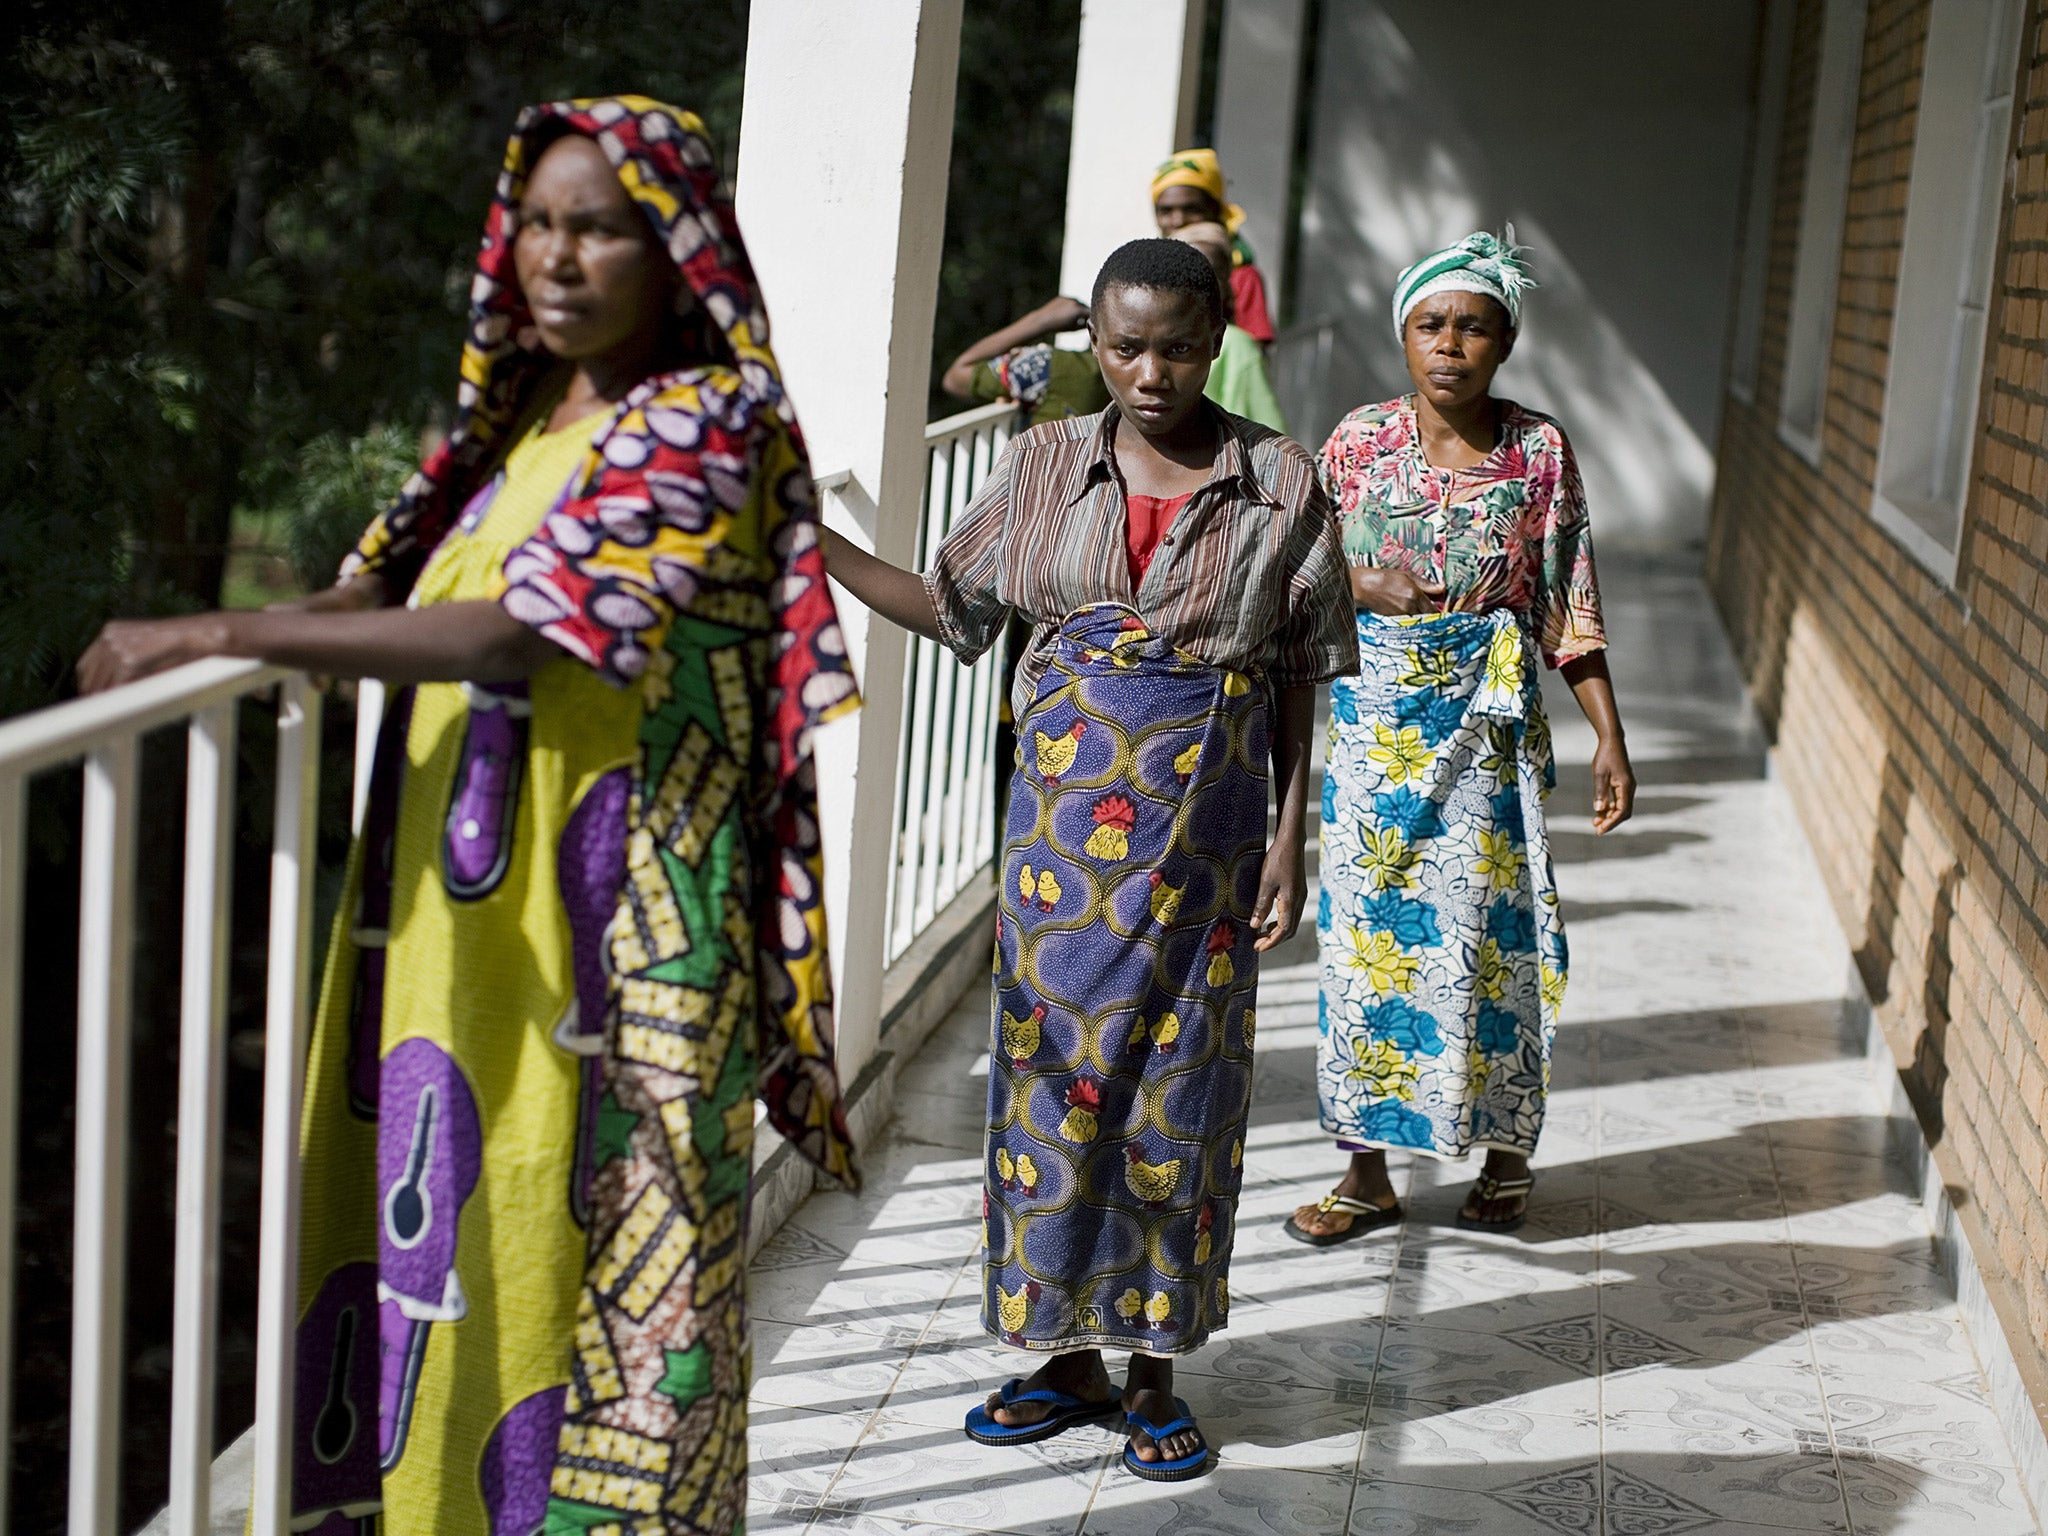 Women recovering from surgery at Panzi hospital in the Congo (Getty)